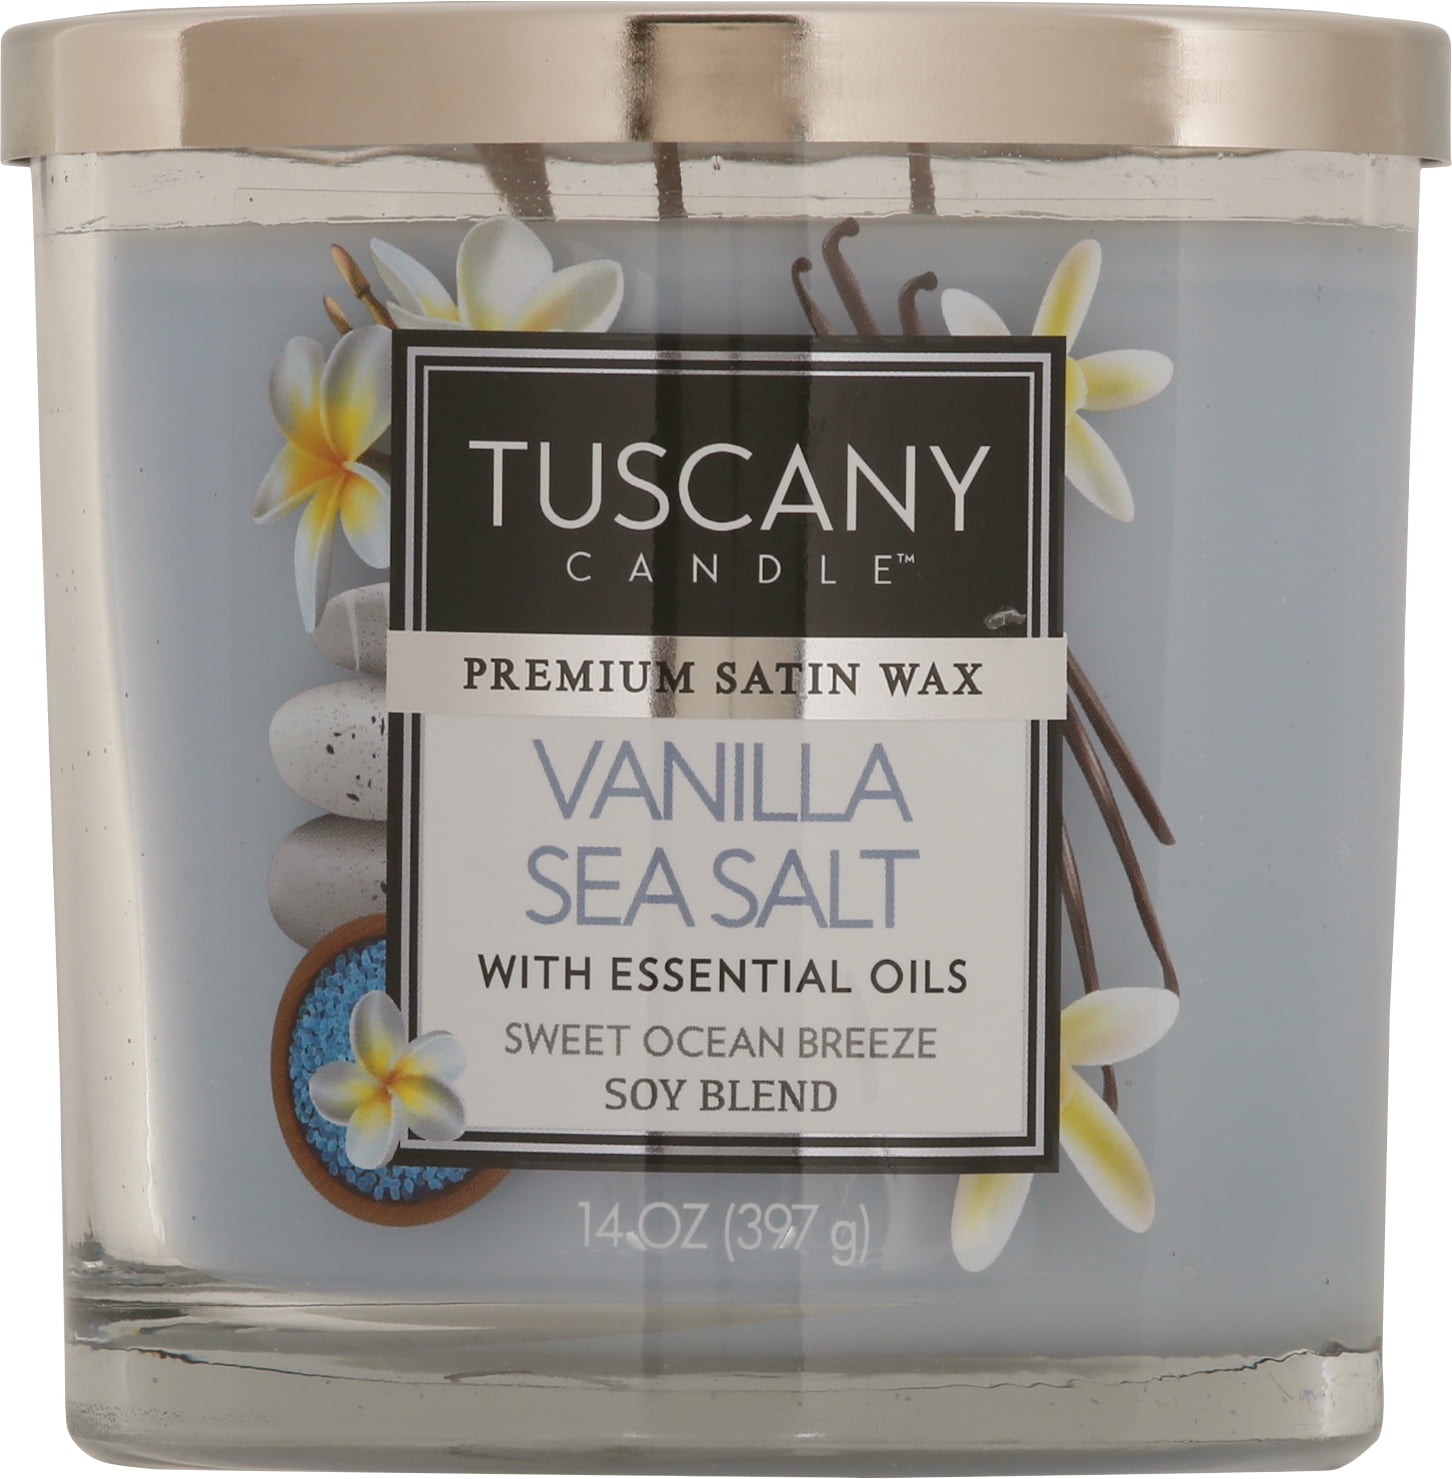 2 Tuscany Candle FALLING LEAVES Soy Blend 3 Wick Scented Wax 14 oz Large 